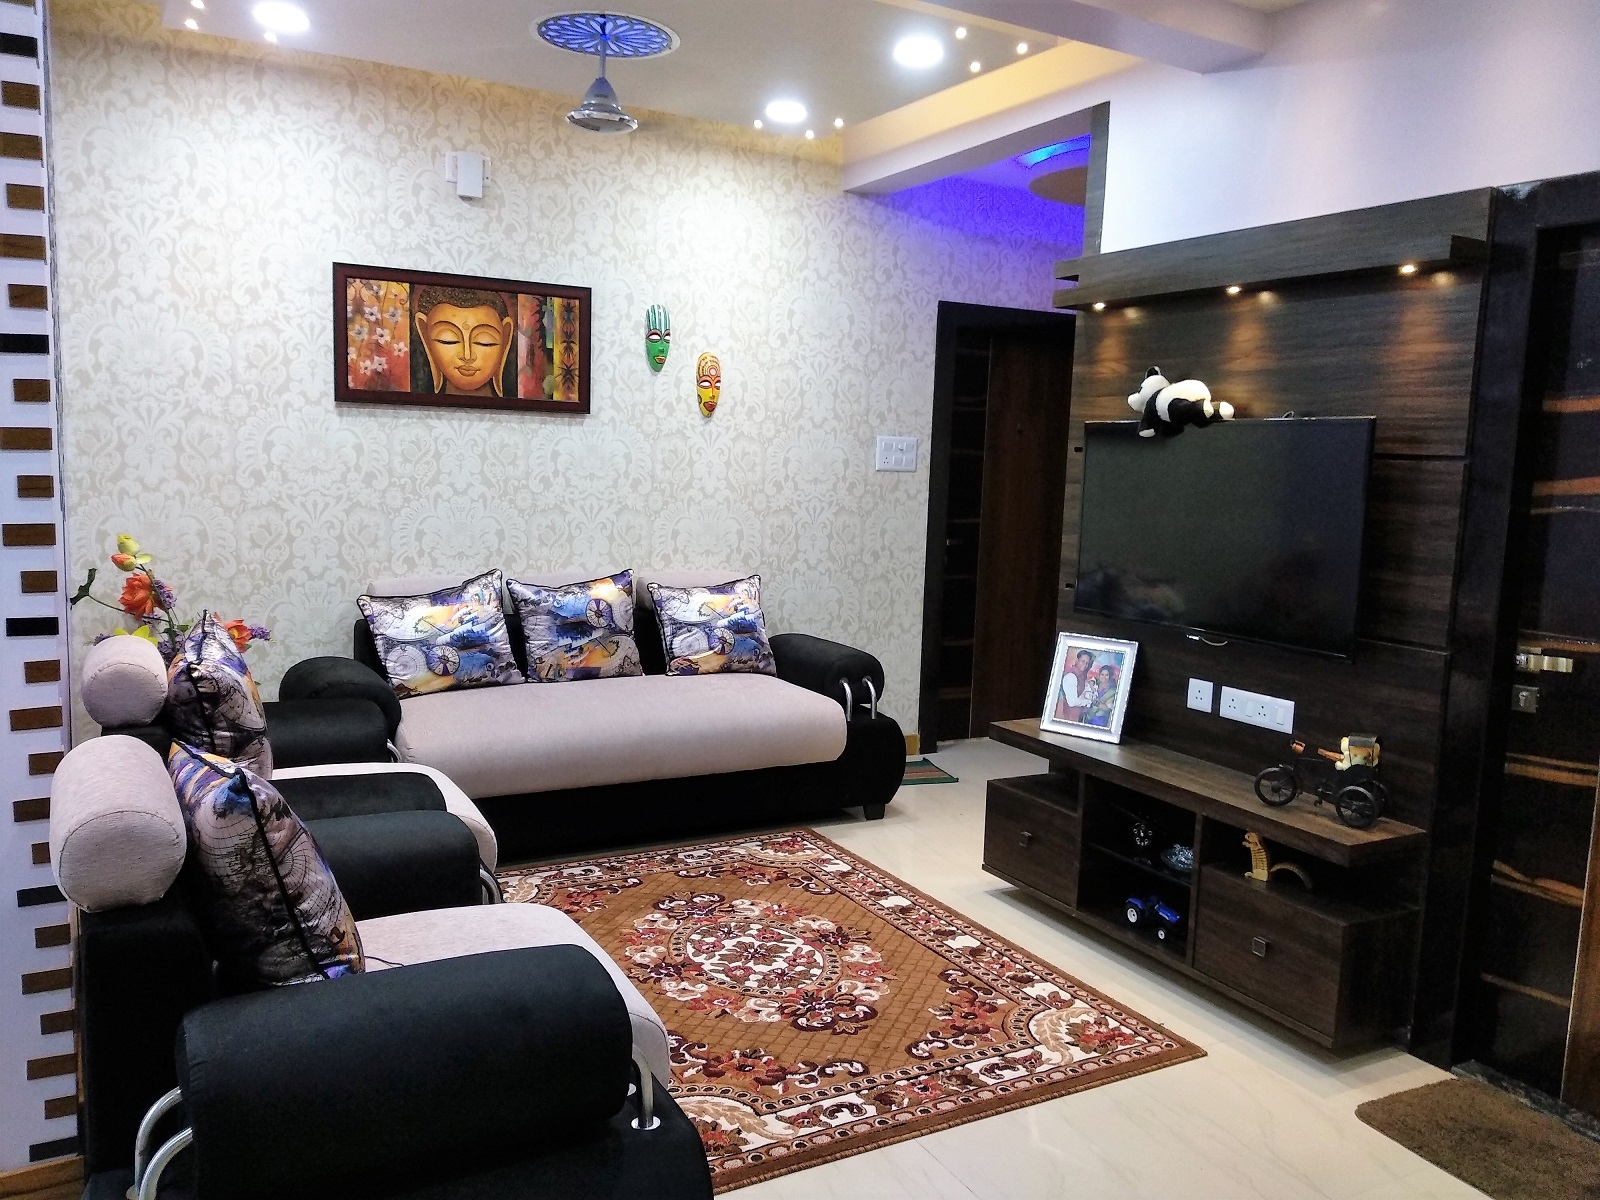 Home Decor Outlets in Bhubaneswar